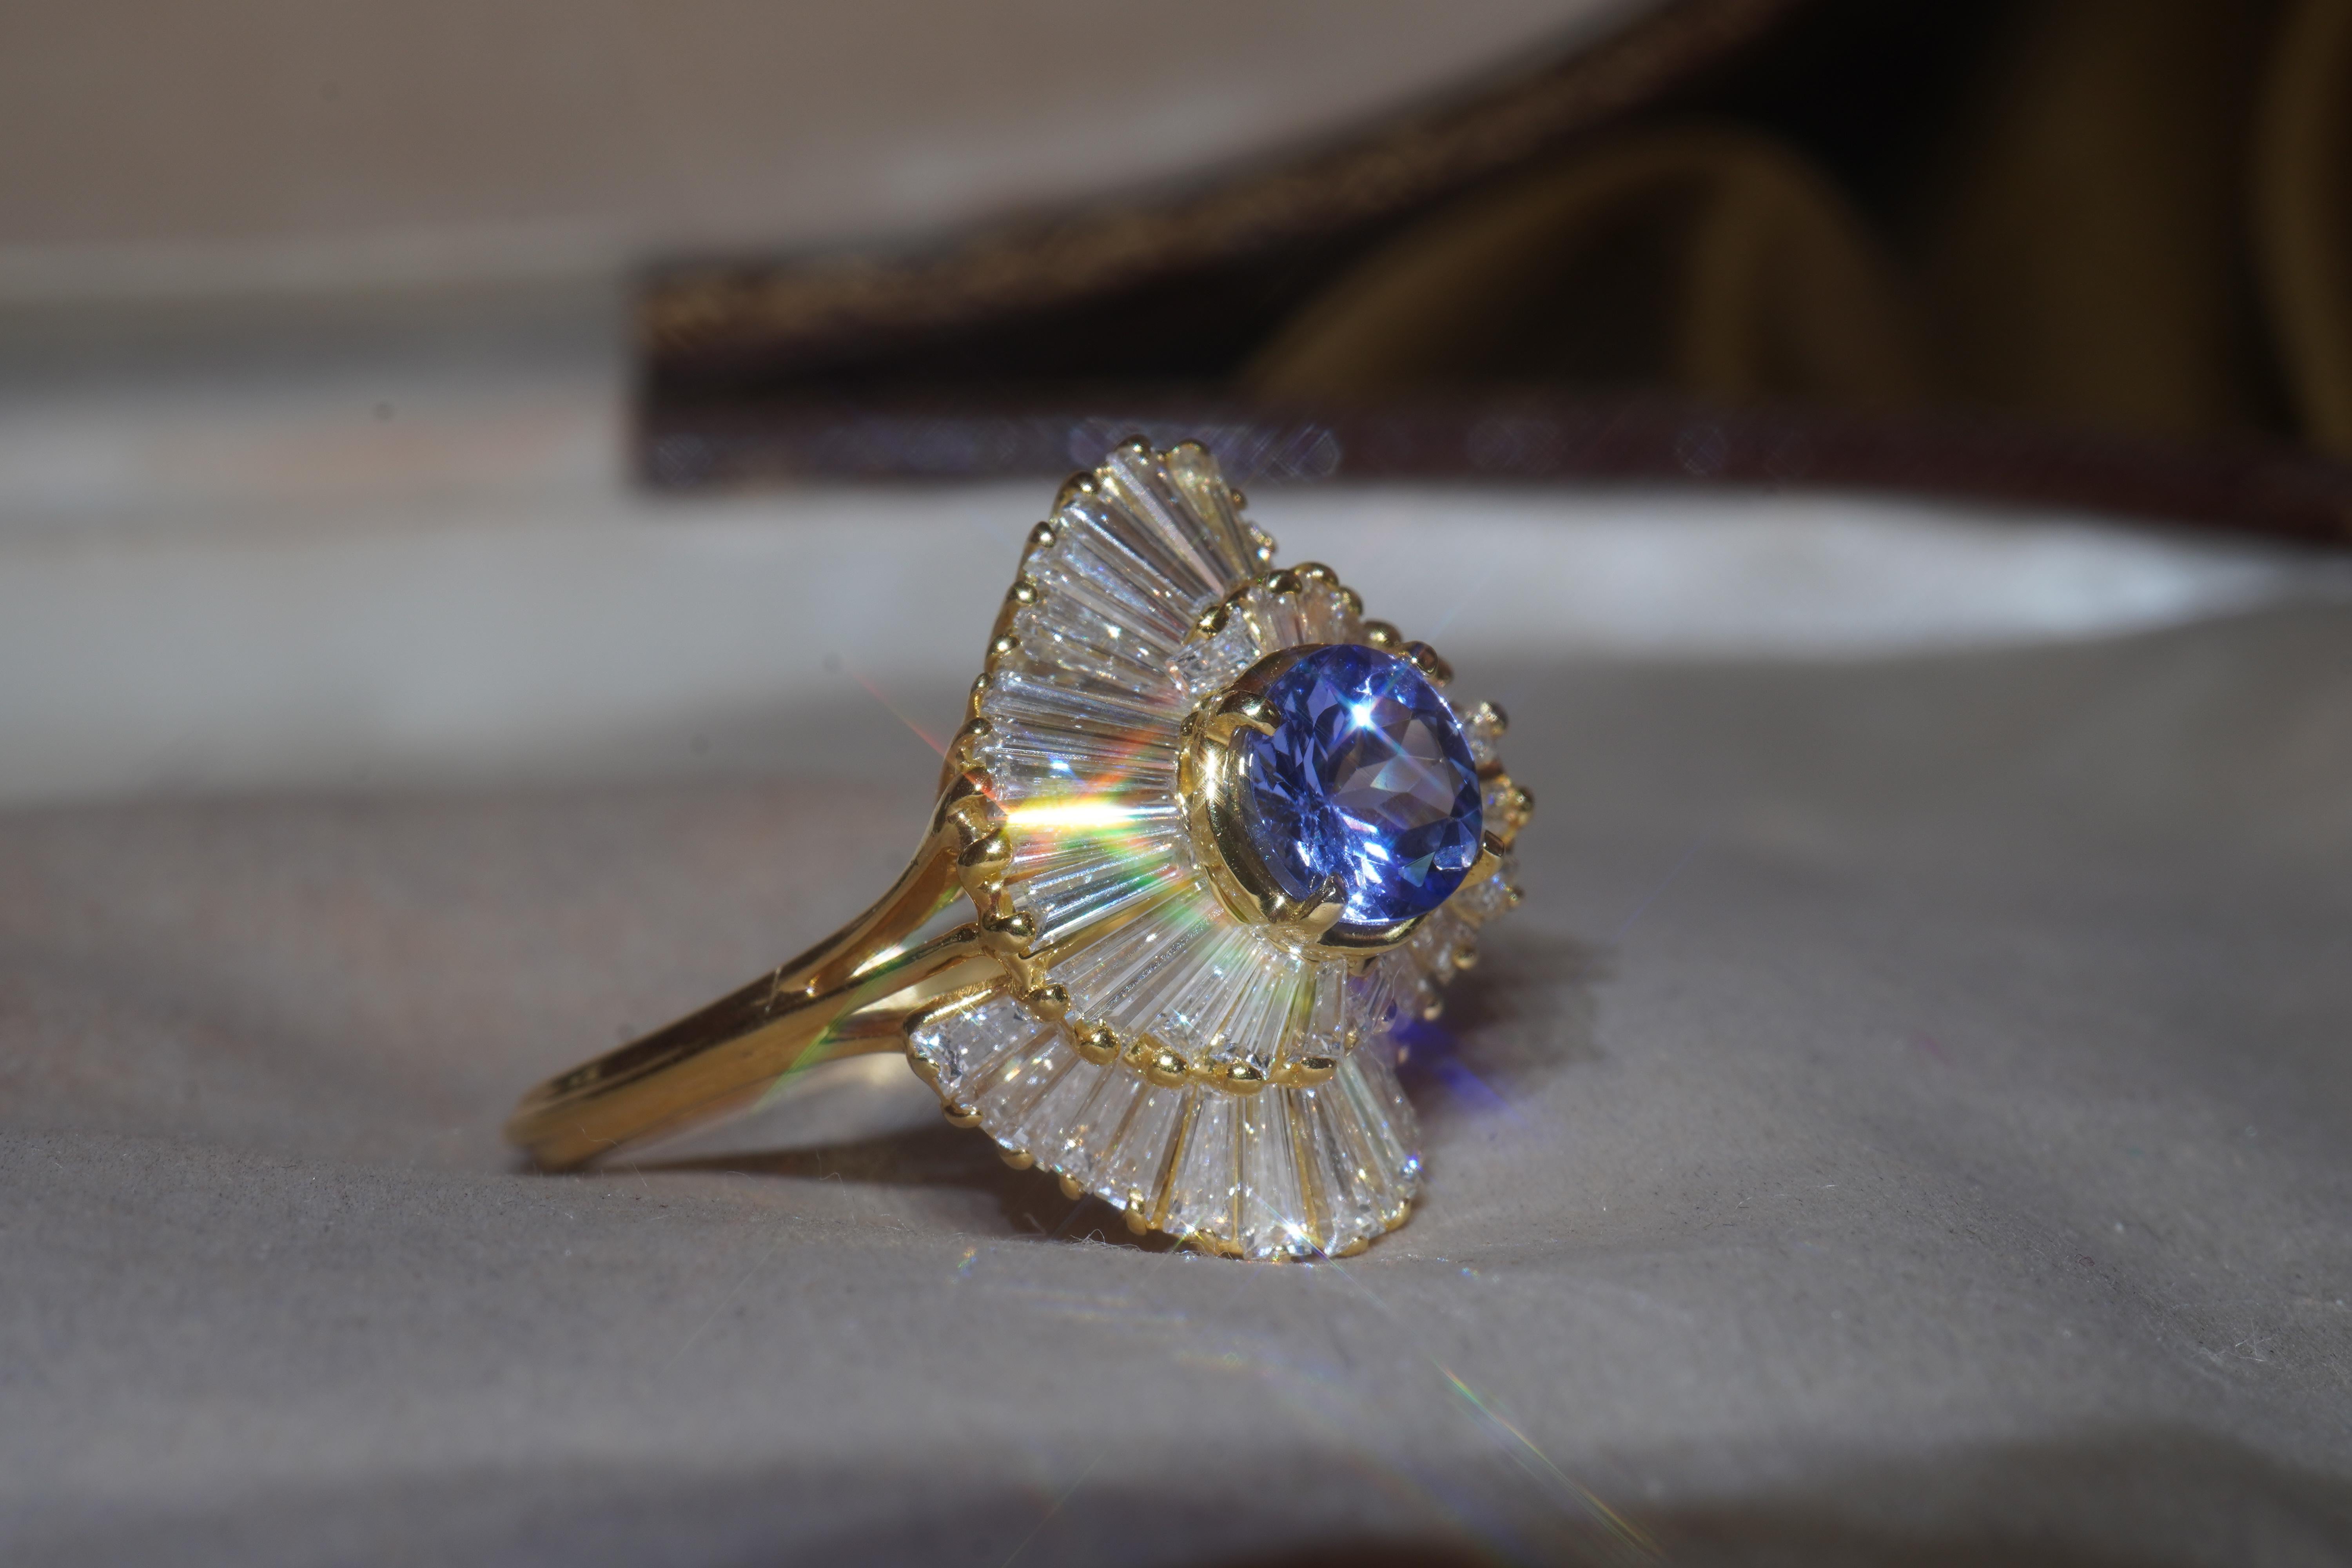 Old South Jewels proudly presents...VINTAGE LUXURY... GIA CERTIFIED 18K SOLID YELLOW GOLD 5.31 CARAT TANZANITE DIAMOND VINTAGE RING.   FINE NATURAL TANZANITE.   (This Gorgeous Violet Tanzanite is Crowned With 4.07 Carats of Sparkling White Natural